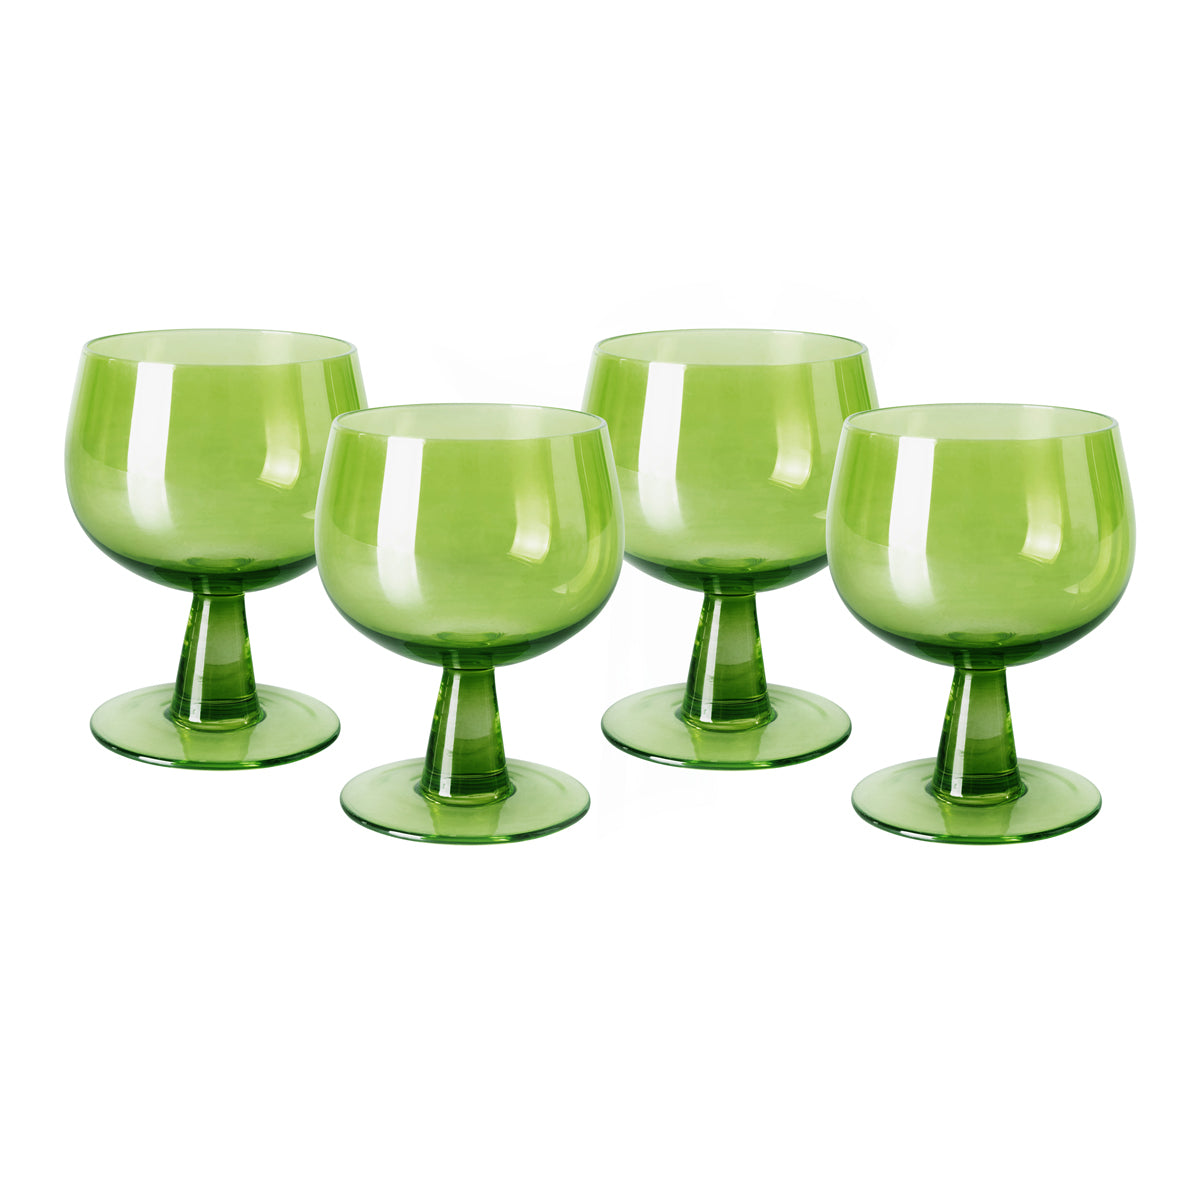 The Emeralds: Wine Glass Low, Lime Green (set of four)